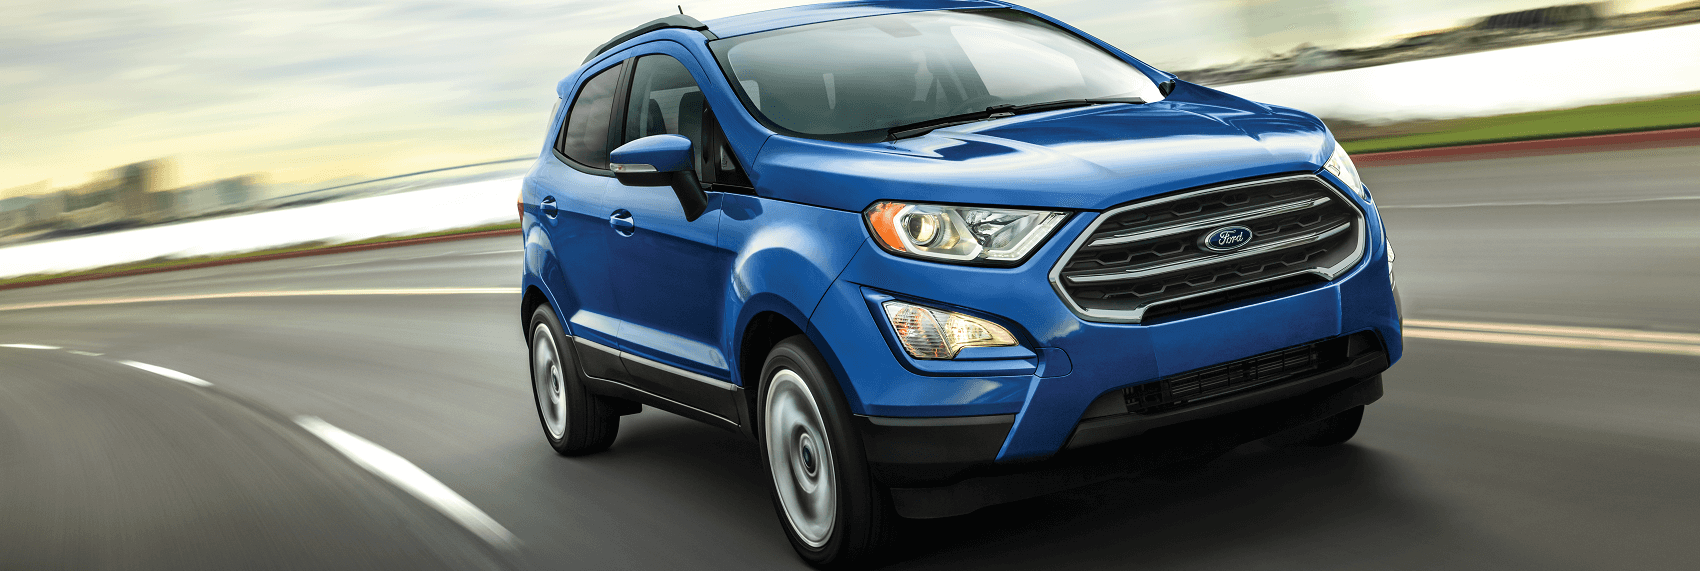 Ford EcoSport driving on highway